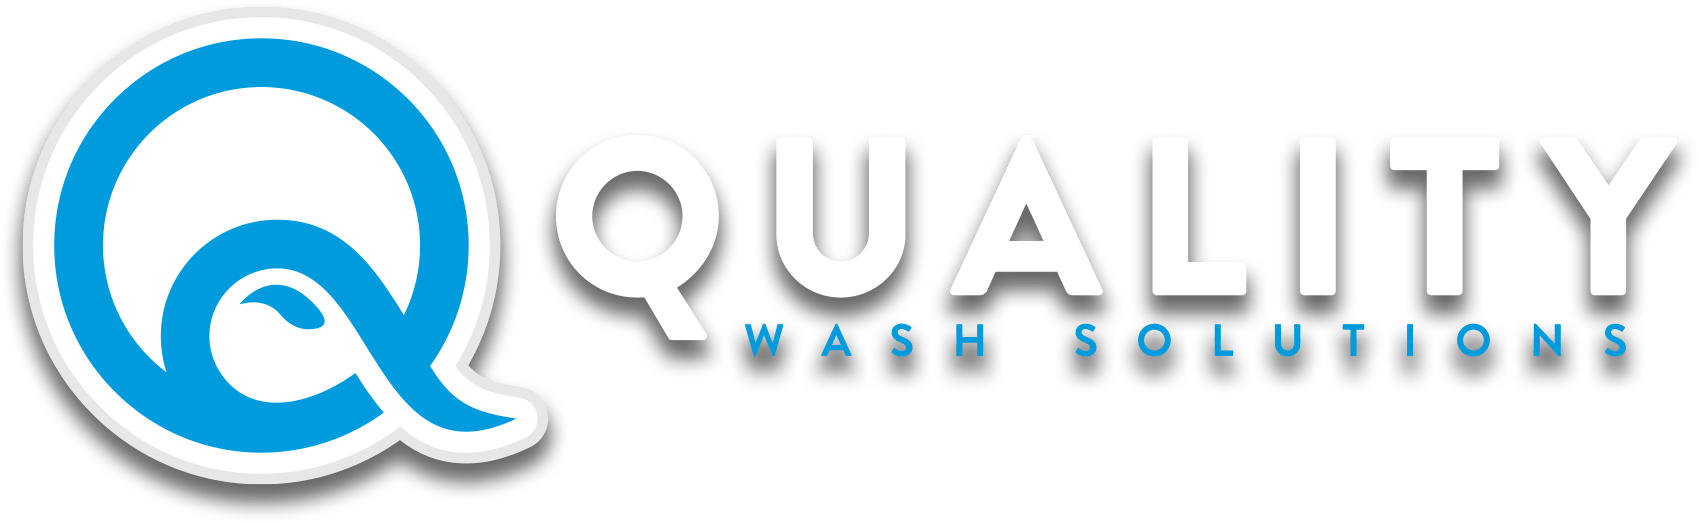 quality wash solutions - Q logo with water drop to show  building car washes